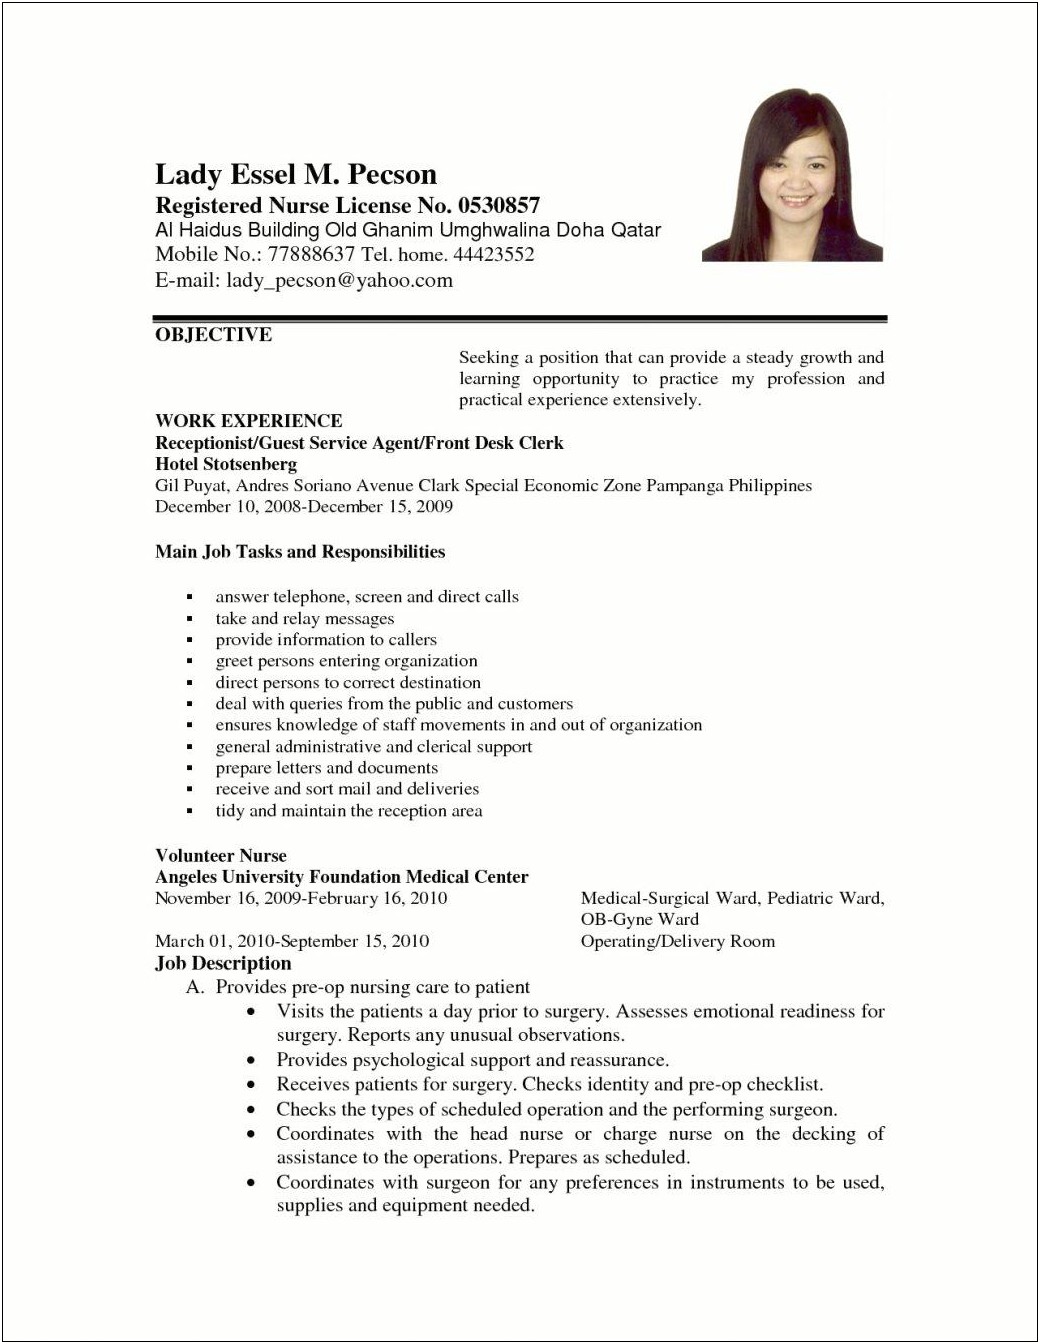 Resume Objectives For Any Job Position